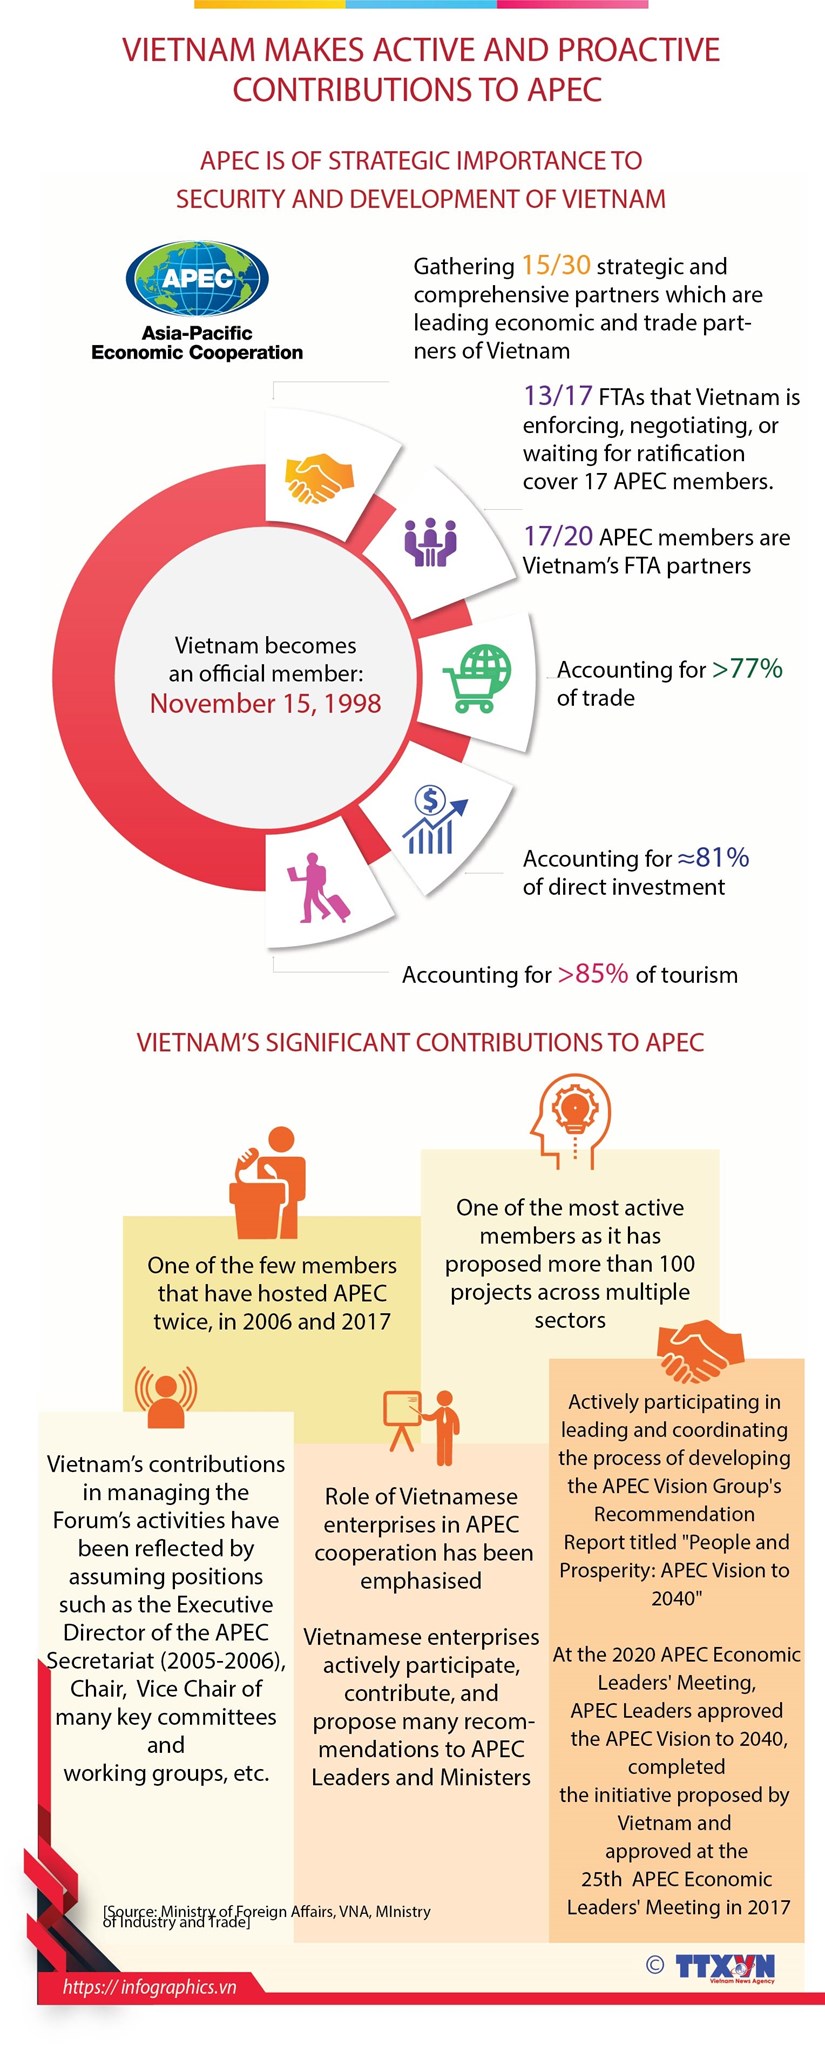 Vietnam makes active and proactive contributions to APEC hinh anh 1